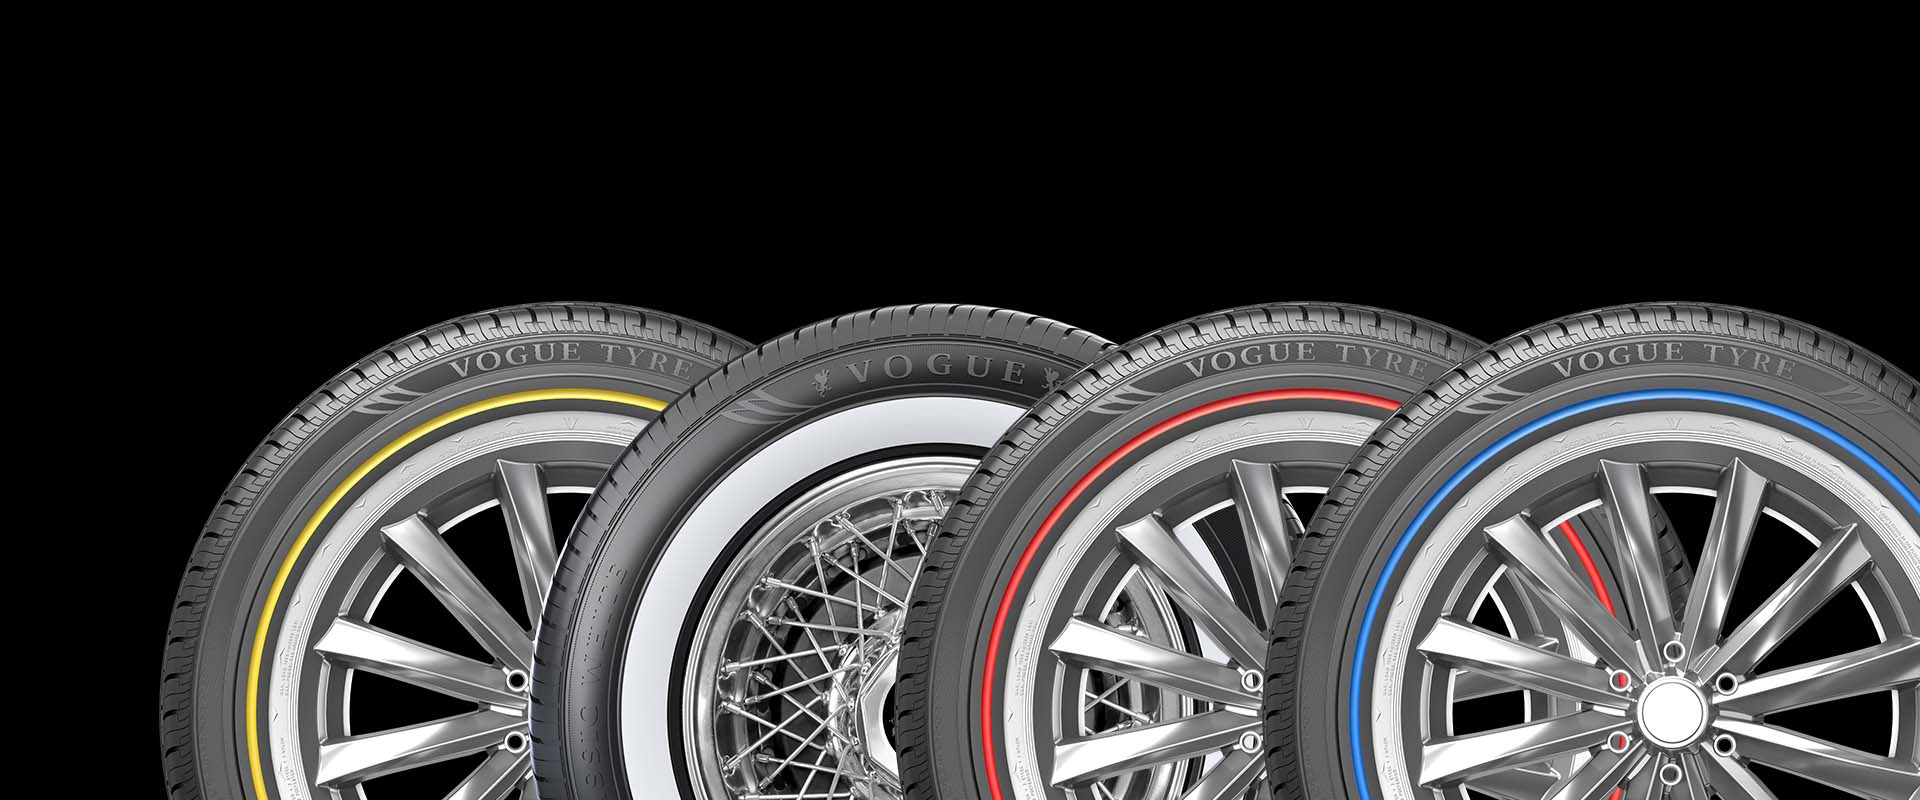 Header image showing all Vogue Tyres sidewall styles